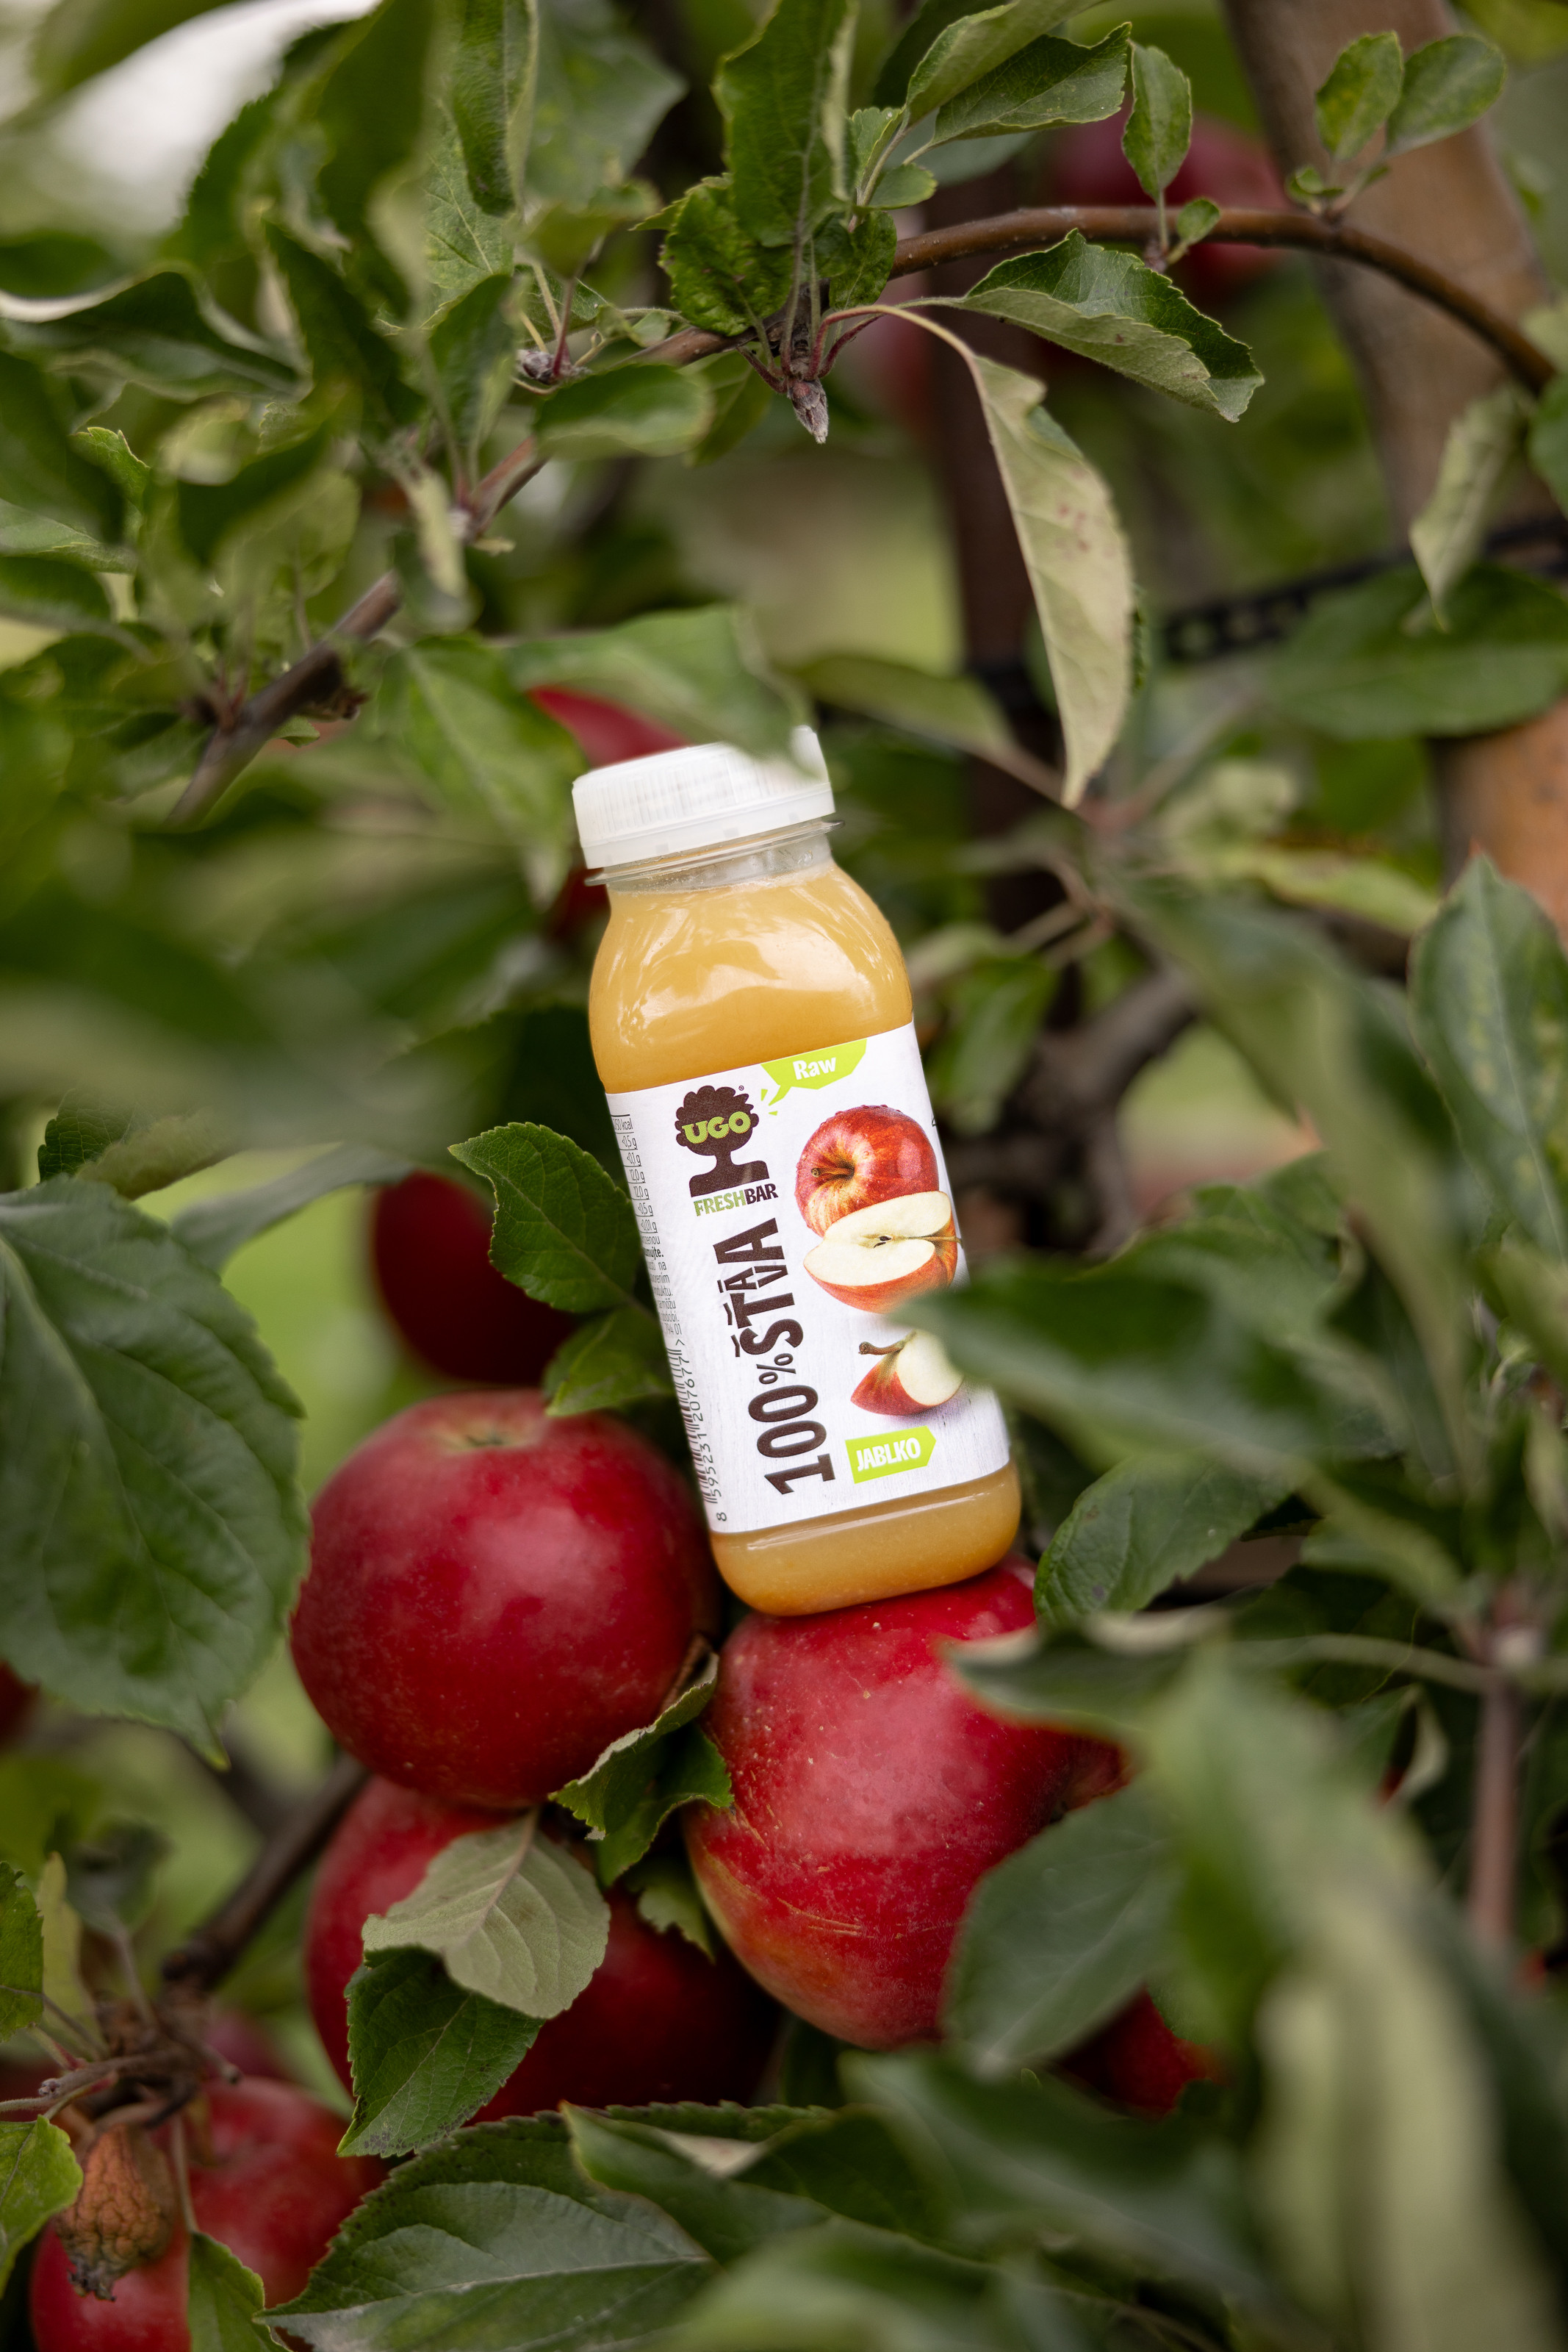 Kofola becomes owner of apple orchards in the Czech Republic  and co-owner of coffee plantations in Colombia